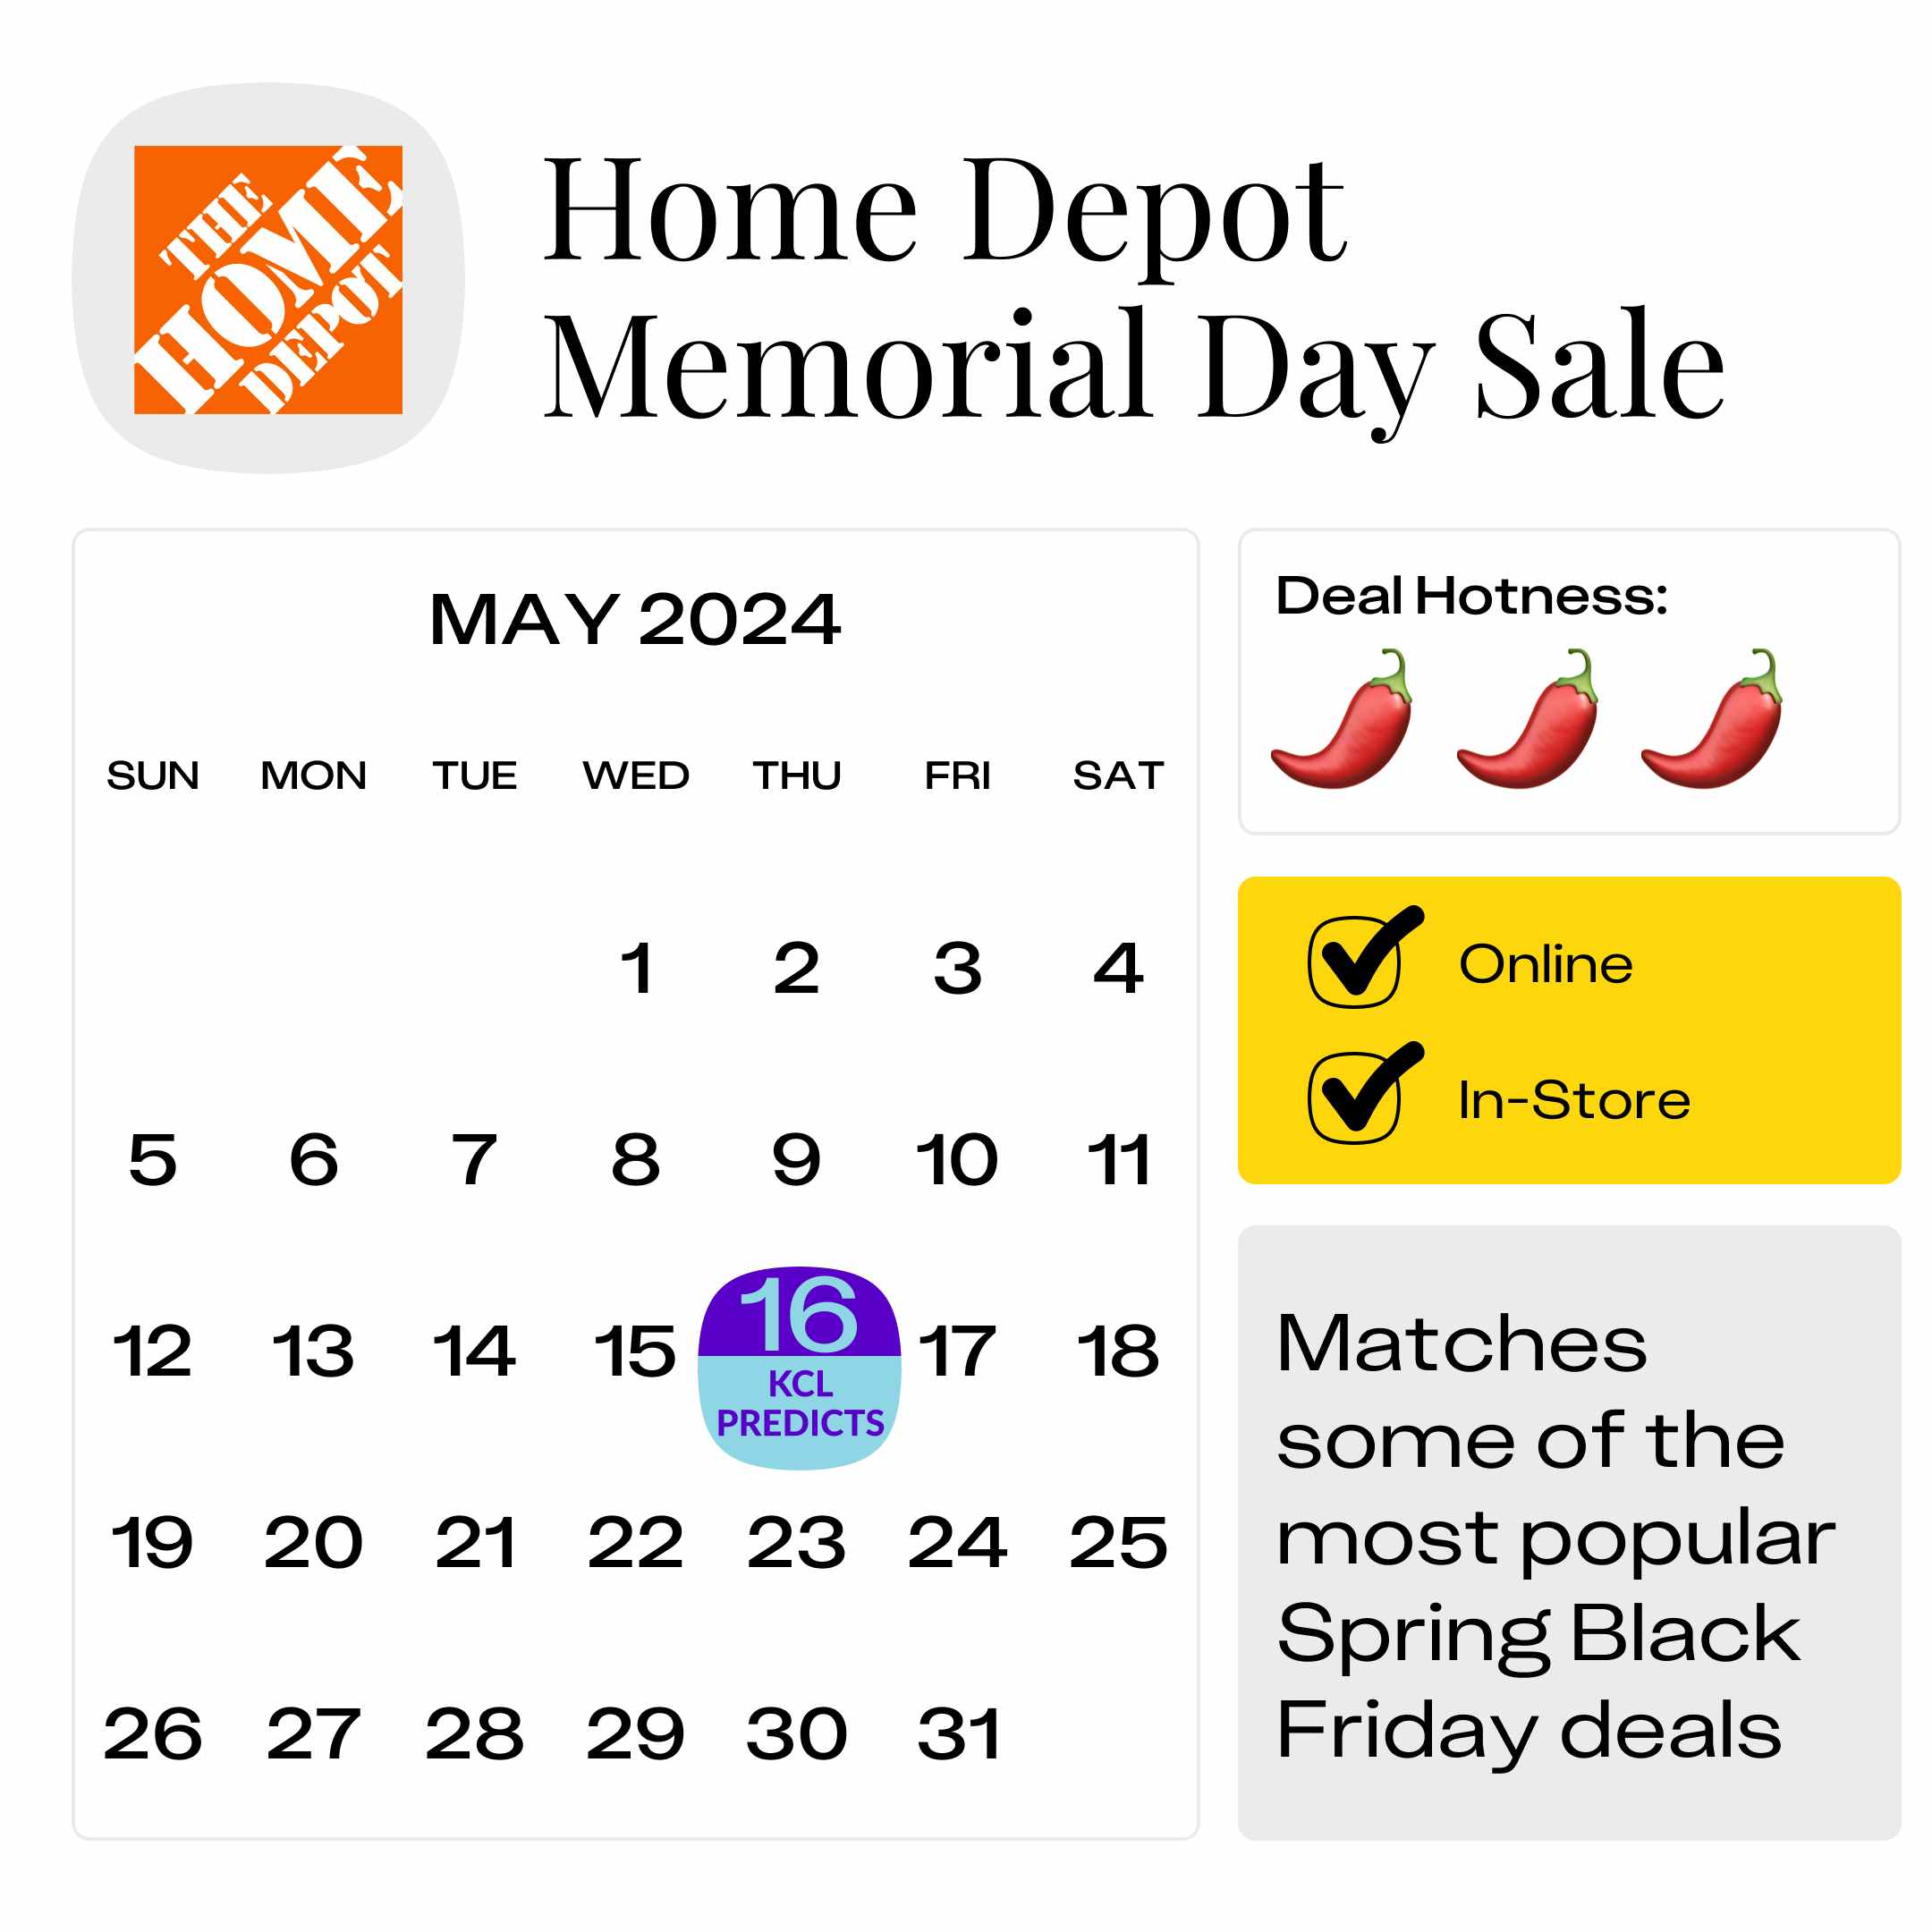 A calendar showing the predicted Home Depot Memorial Day sale date: Thursday, May 16, 2024.